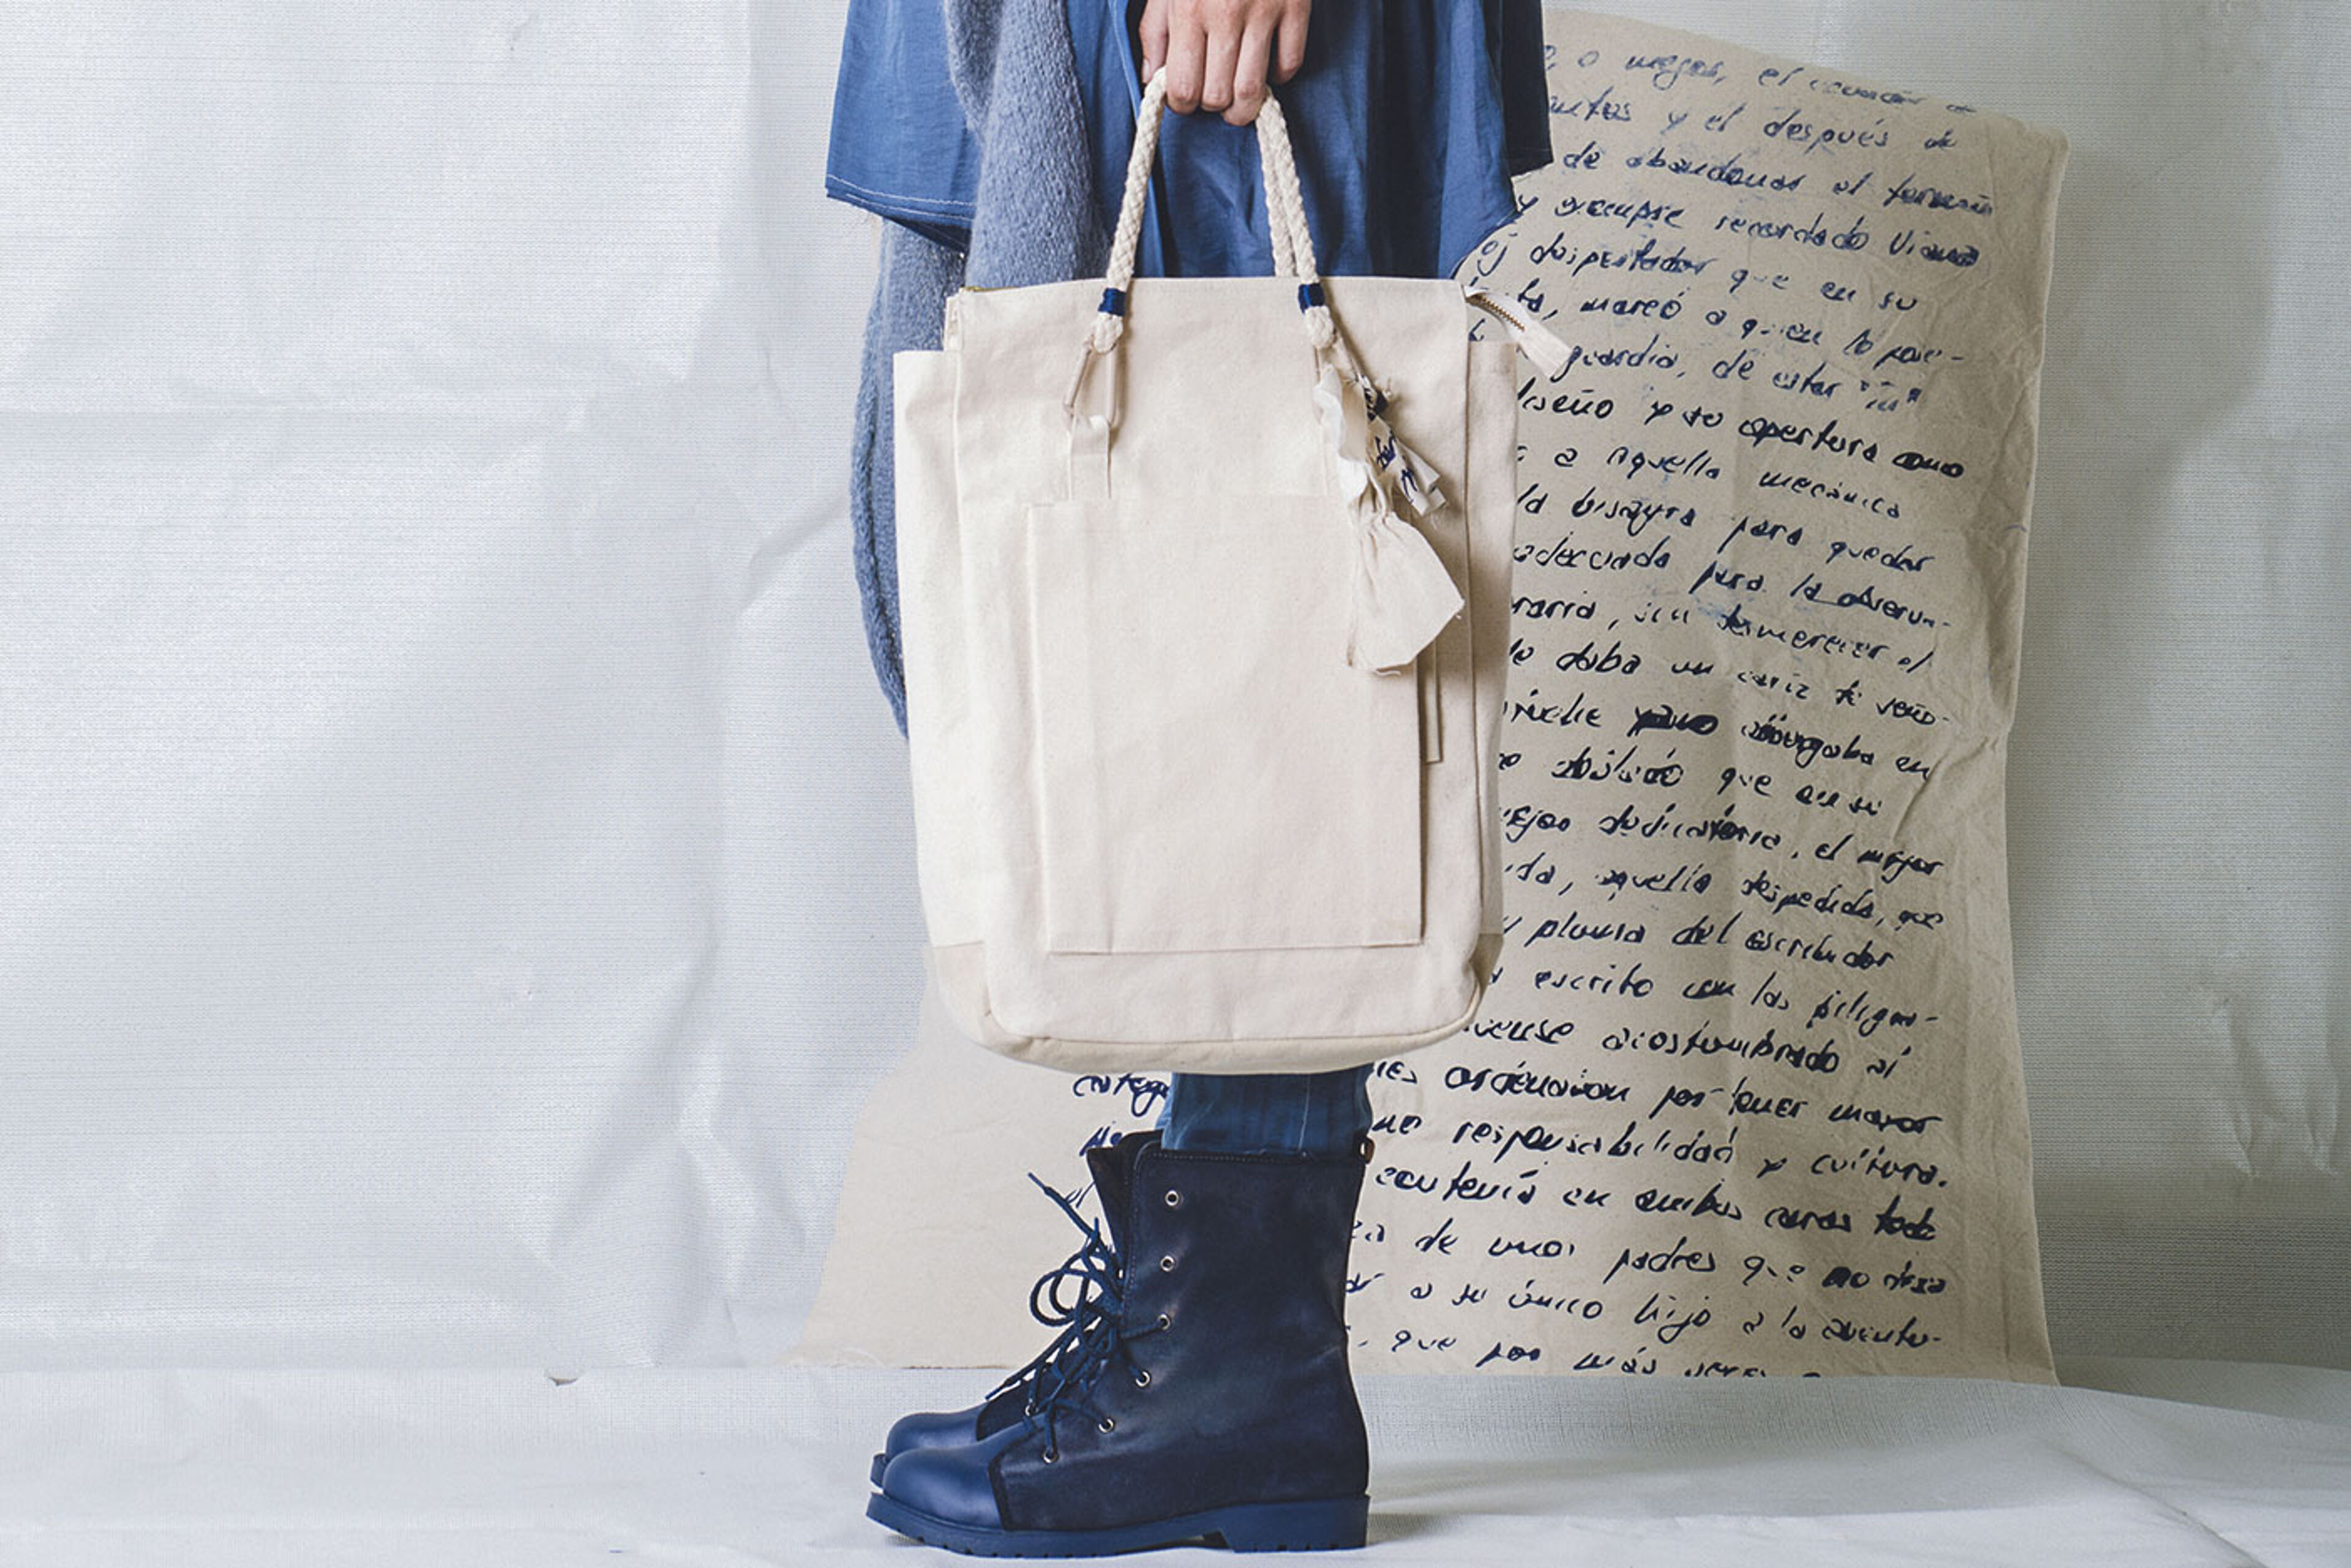 A person holds a canvas tote bag, featuring a casual style against a backdrop with handwritten notes.